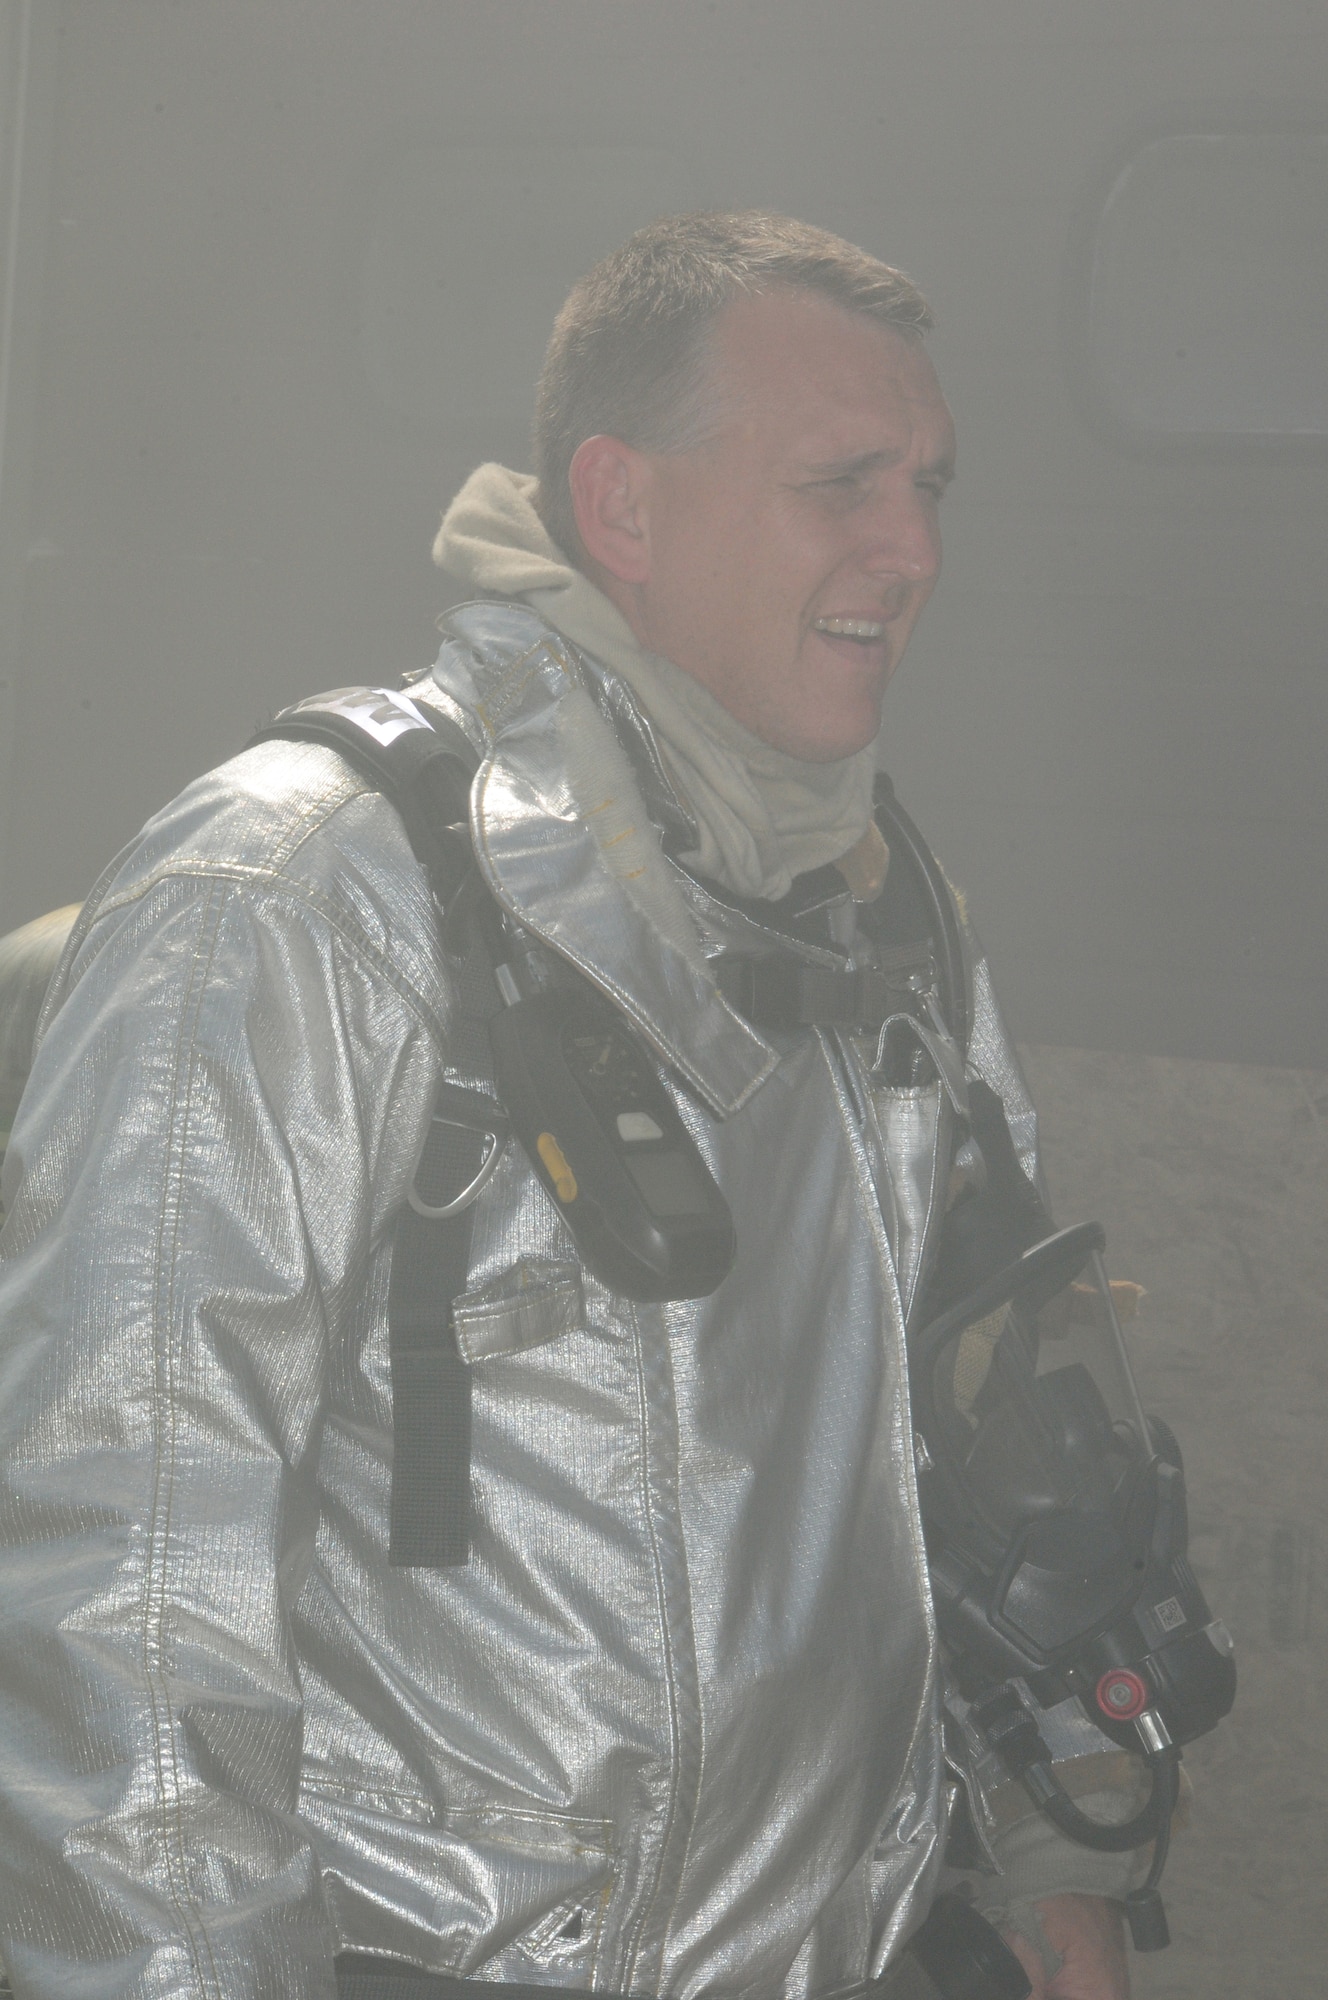 A 148th Fighter Wing, Duluth, Minn. firefighter takes a breather after participating in a Readiness Exercise scenario on July 20, 2013.  The Air Combat Command (ACC) Inspector General team evaluated the 148FW during a Readiness Inspection (RI), Aug. 22-24, 2013, the wing received an overall grade of excellent.  (U.S. Air National Guard photo by Master Sgt. Ralph J. Kapustka/Released)